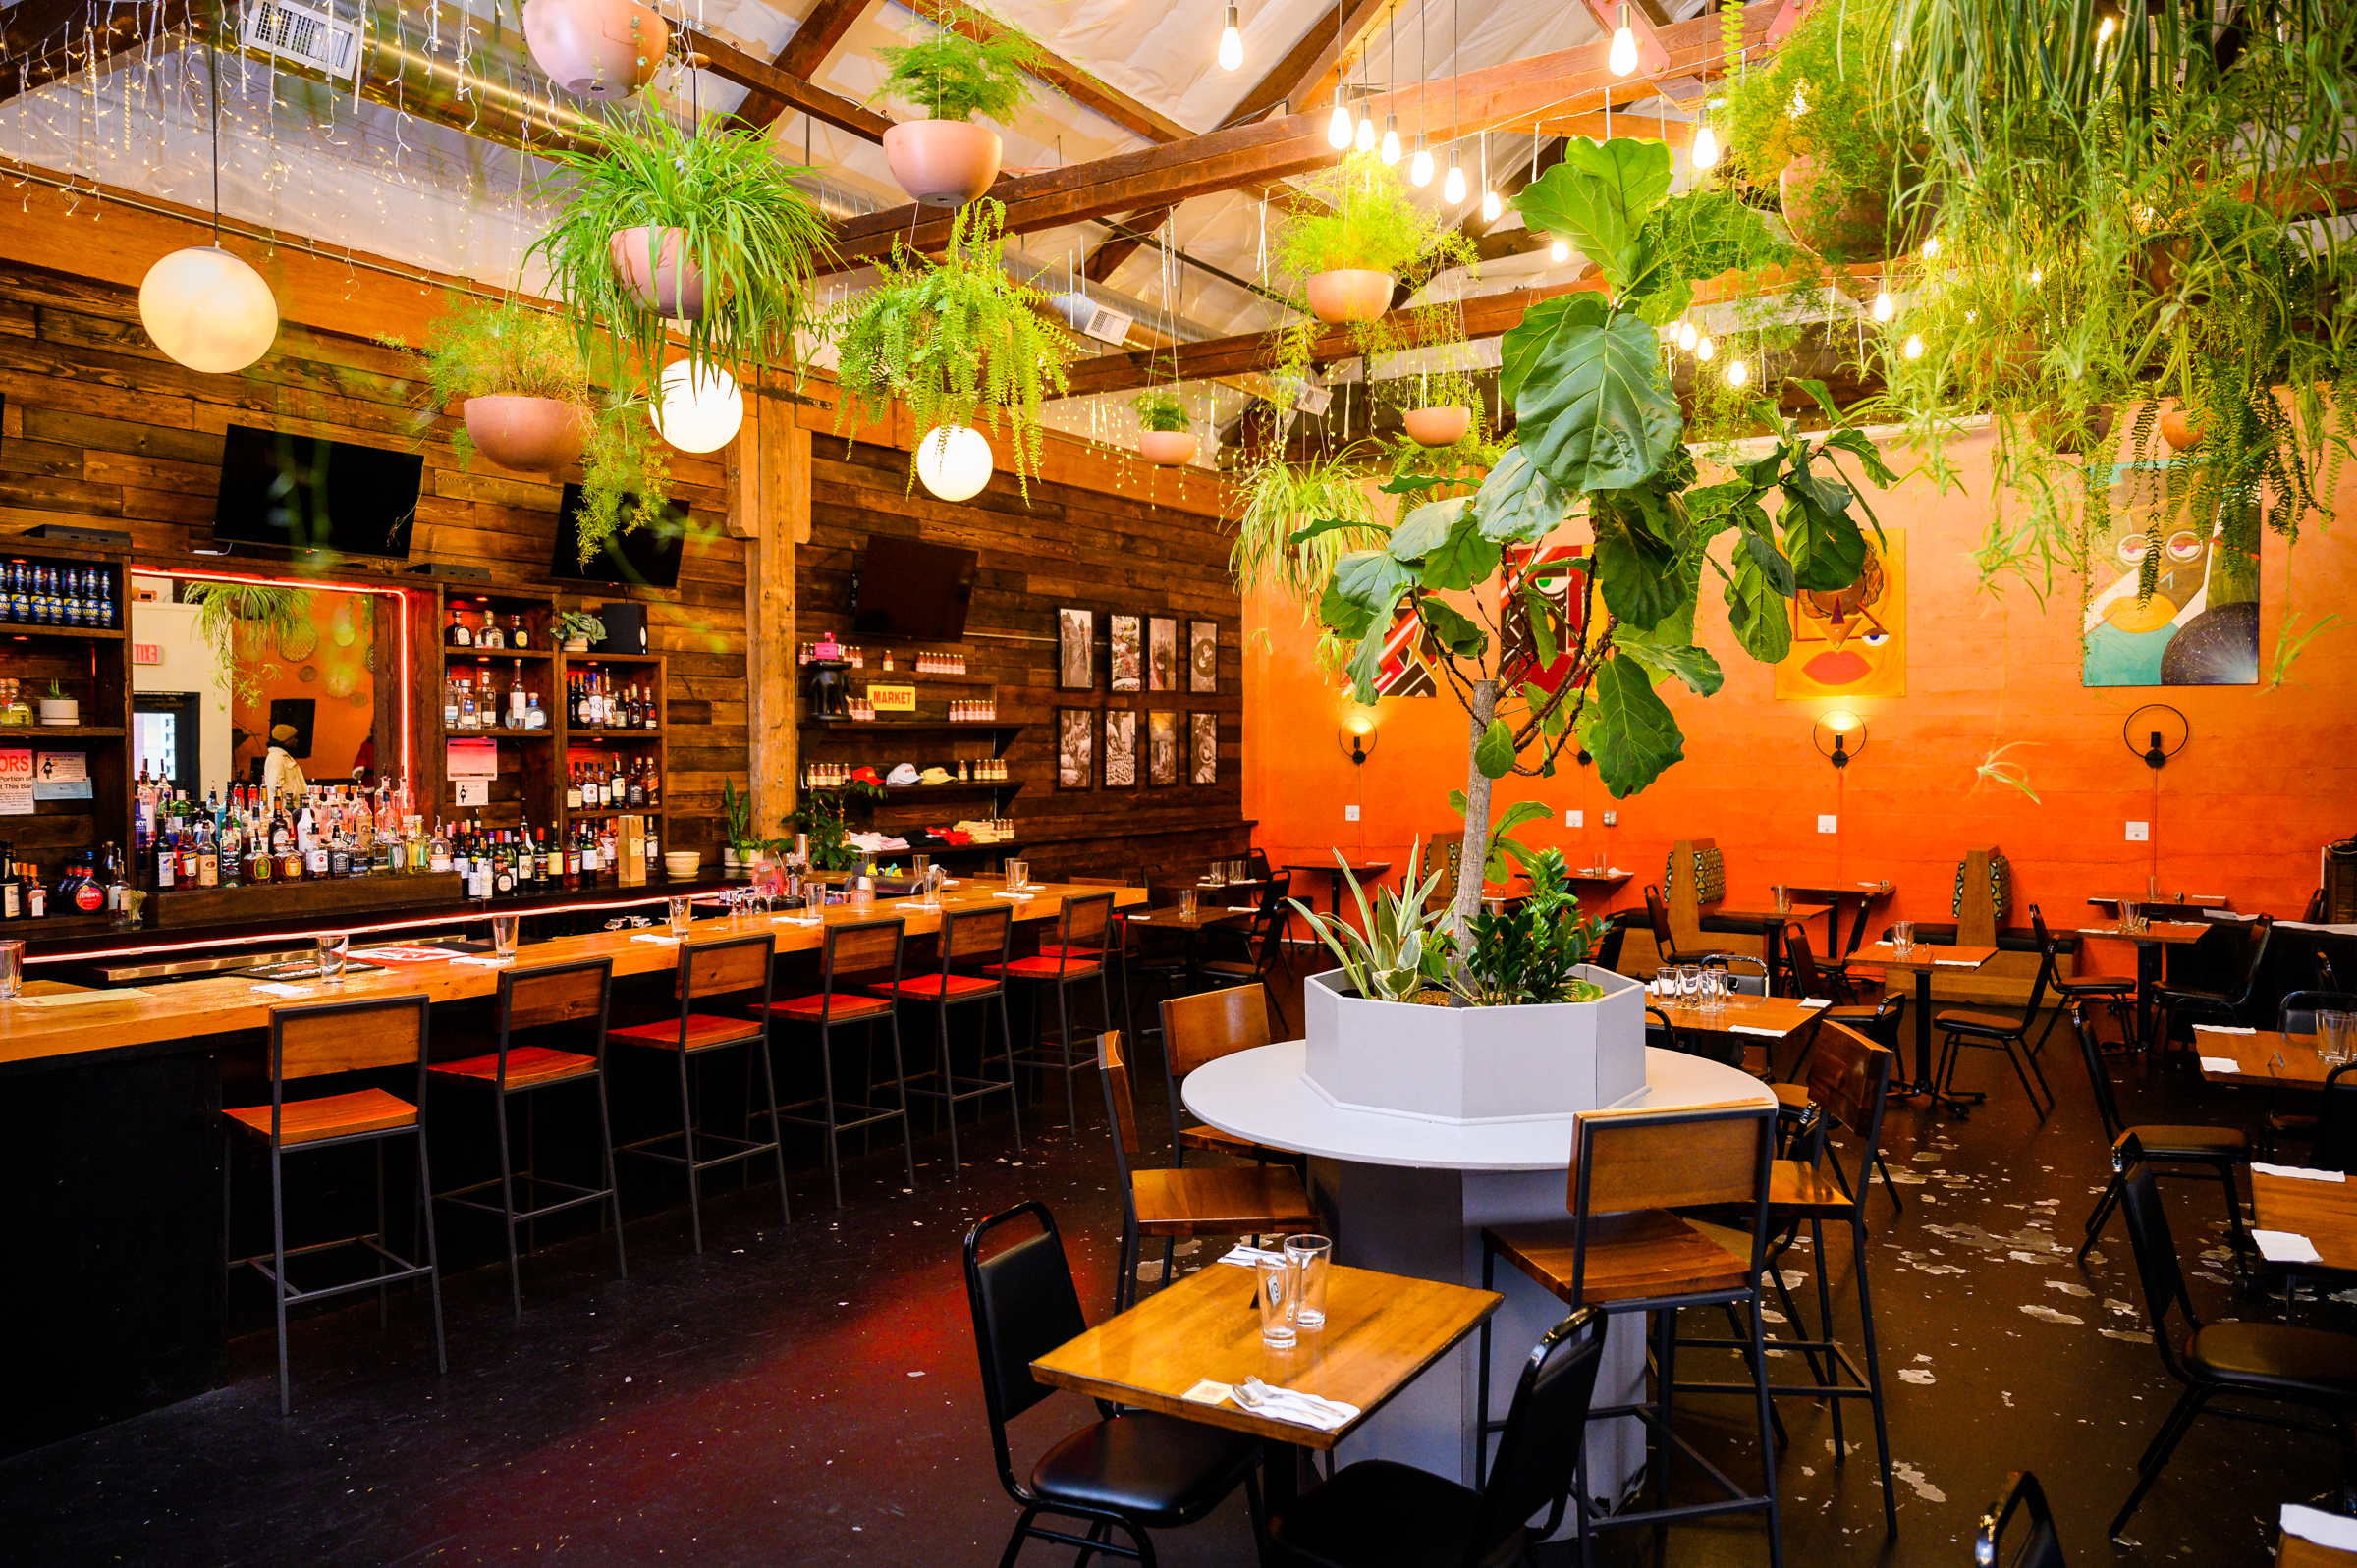 Plants hang from the rafters in the colorful dining room at Akadi in Southeast Portland.